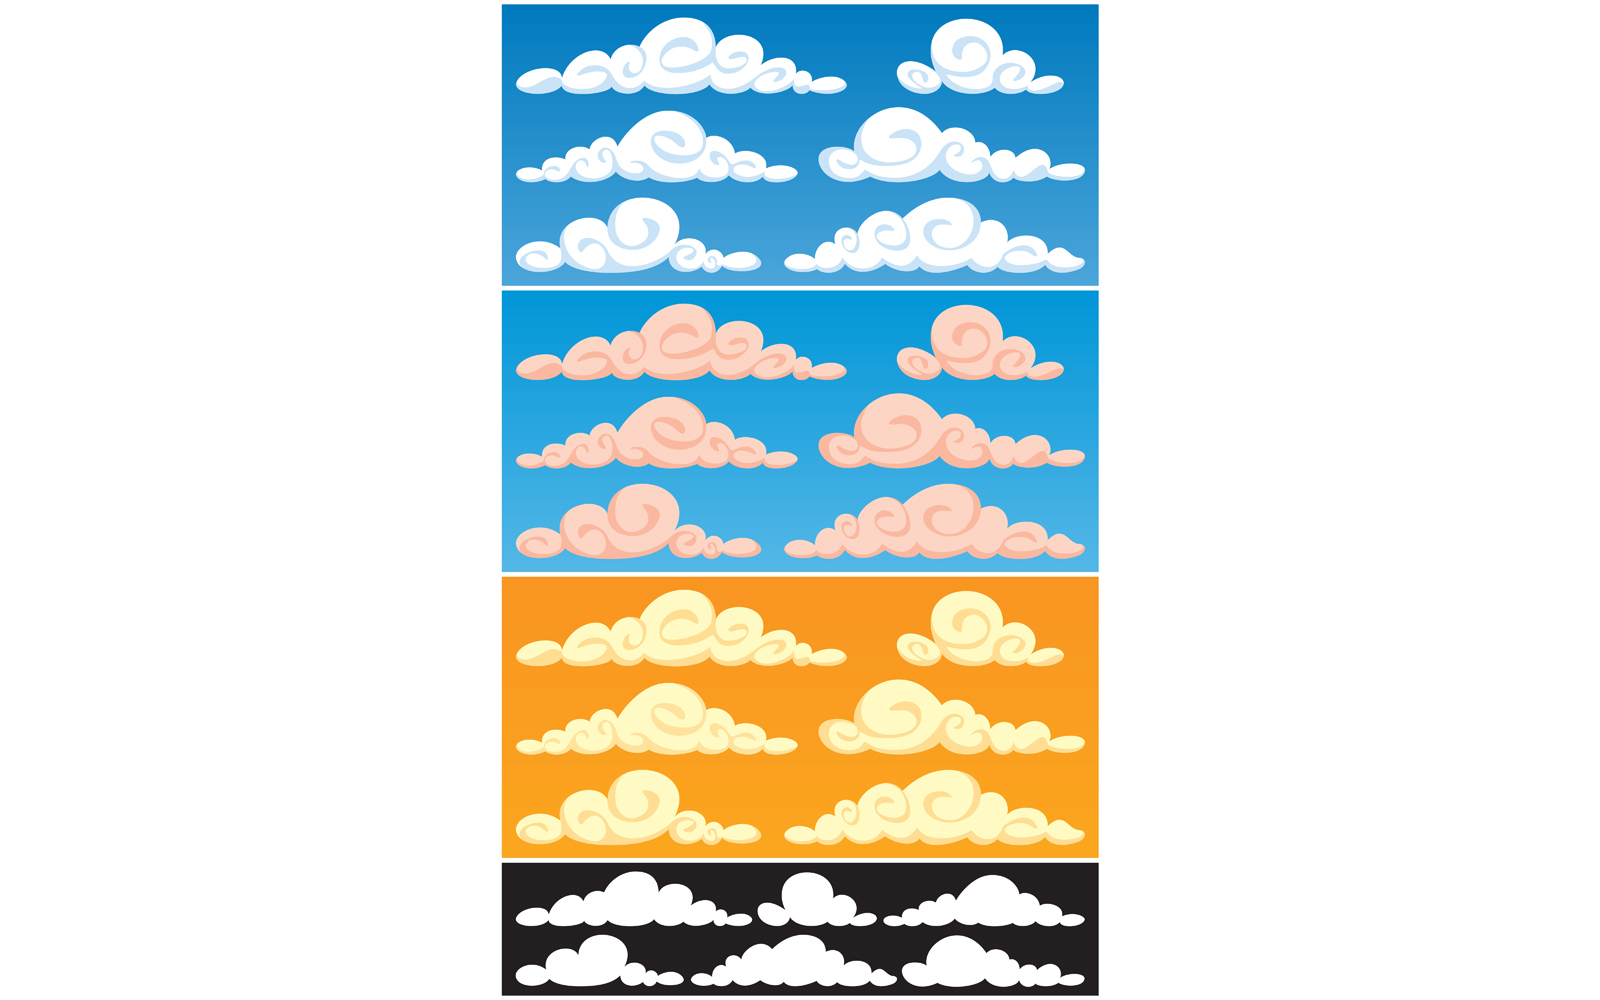 Clouds - Vector Image